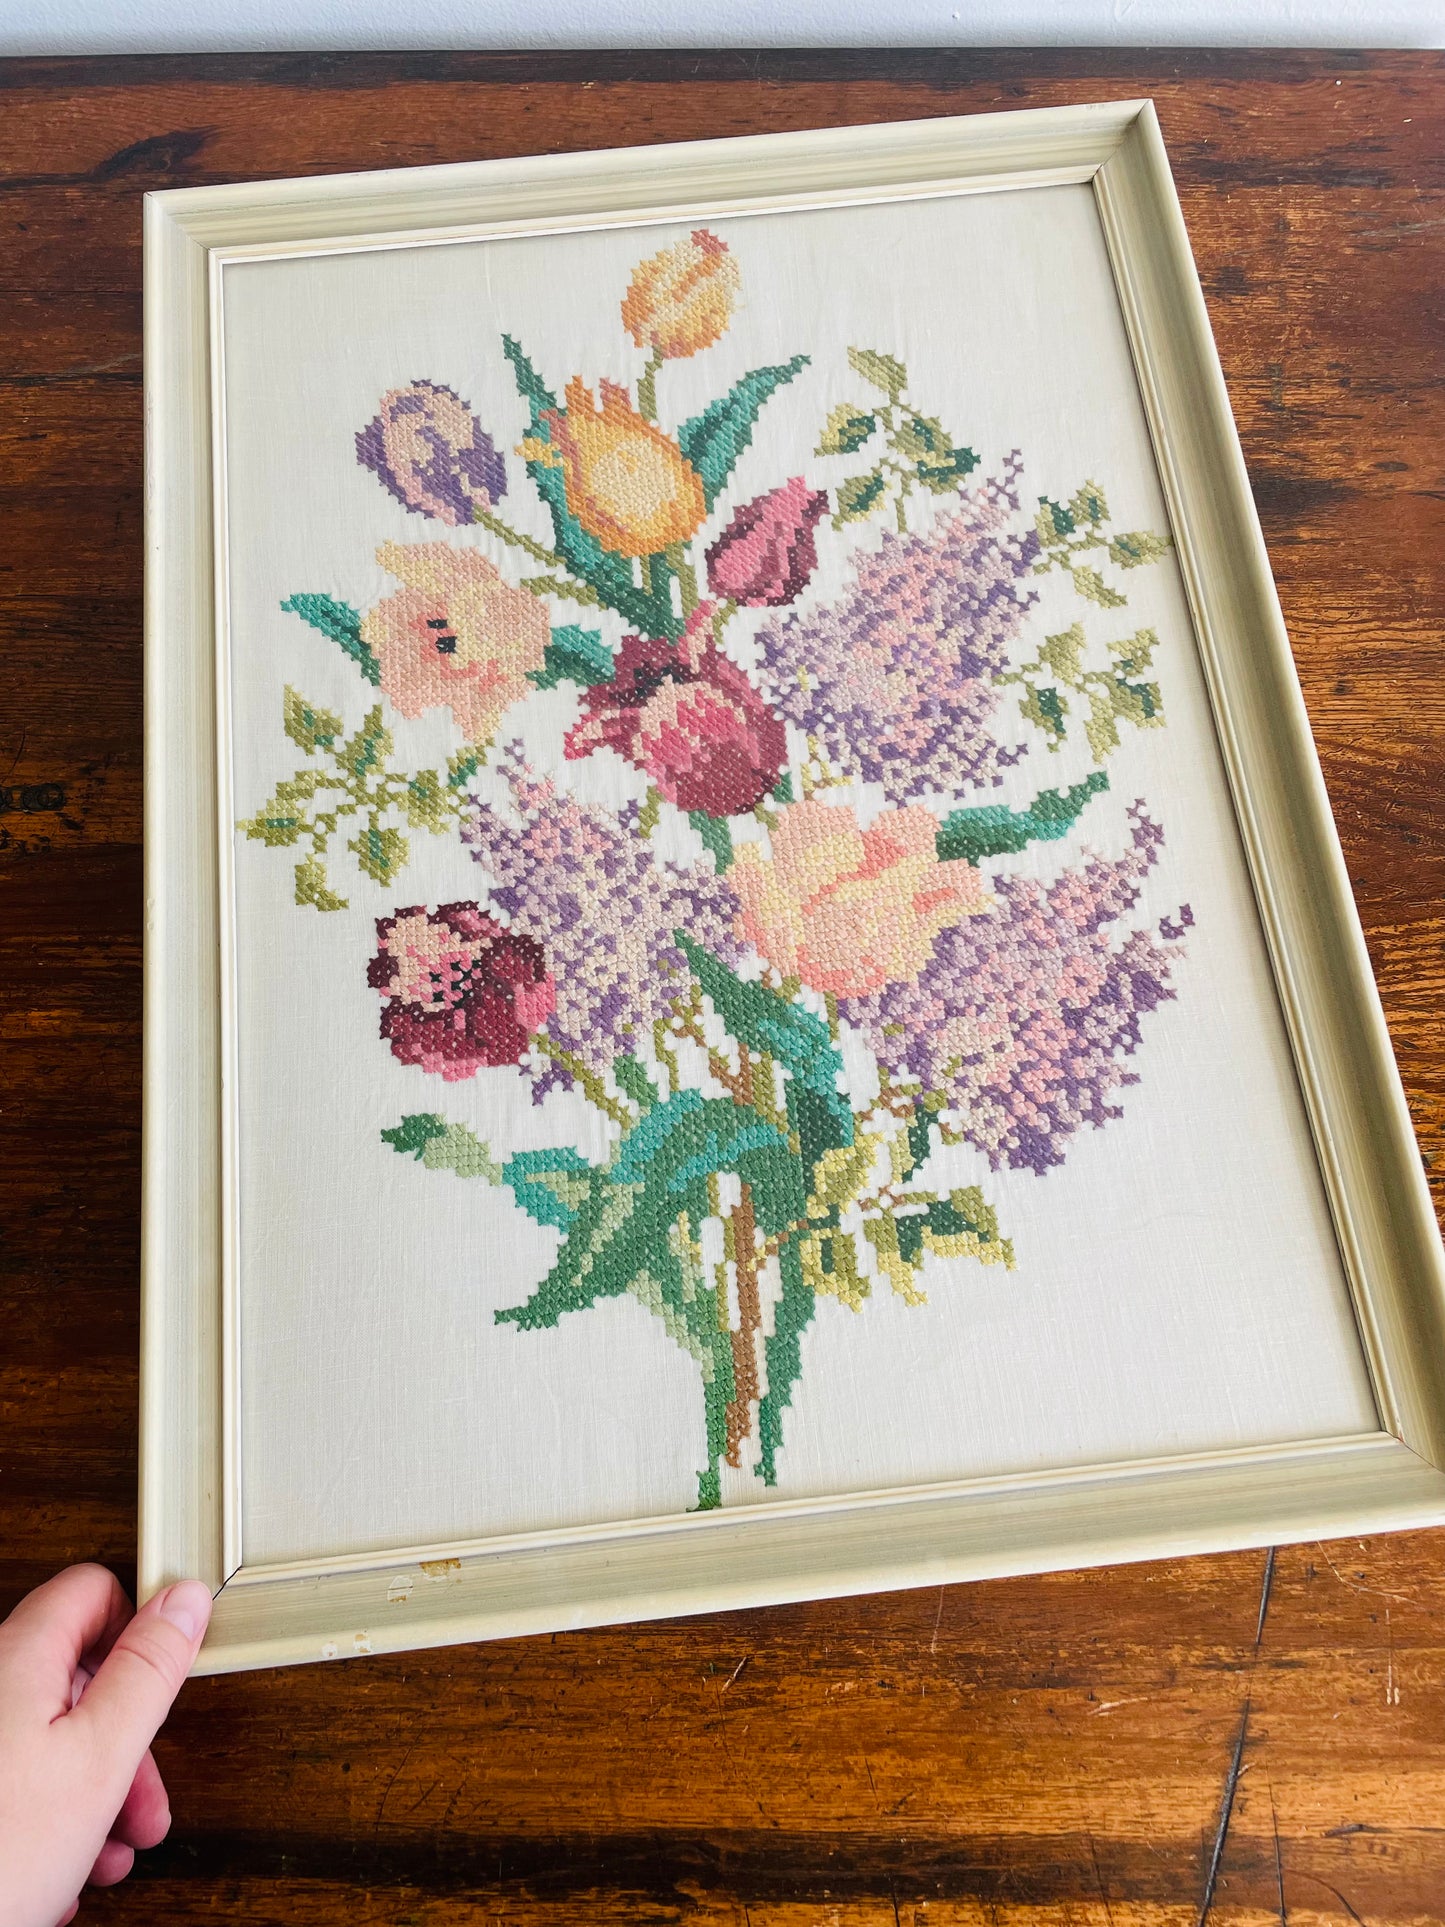 Framed Floral Bouquet Cross-Stitch Needlepoint Embroidery Picture on White Background